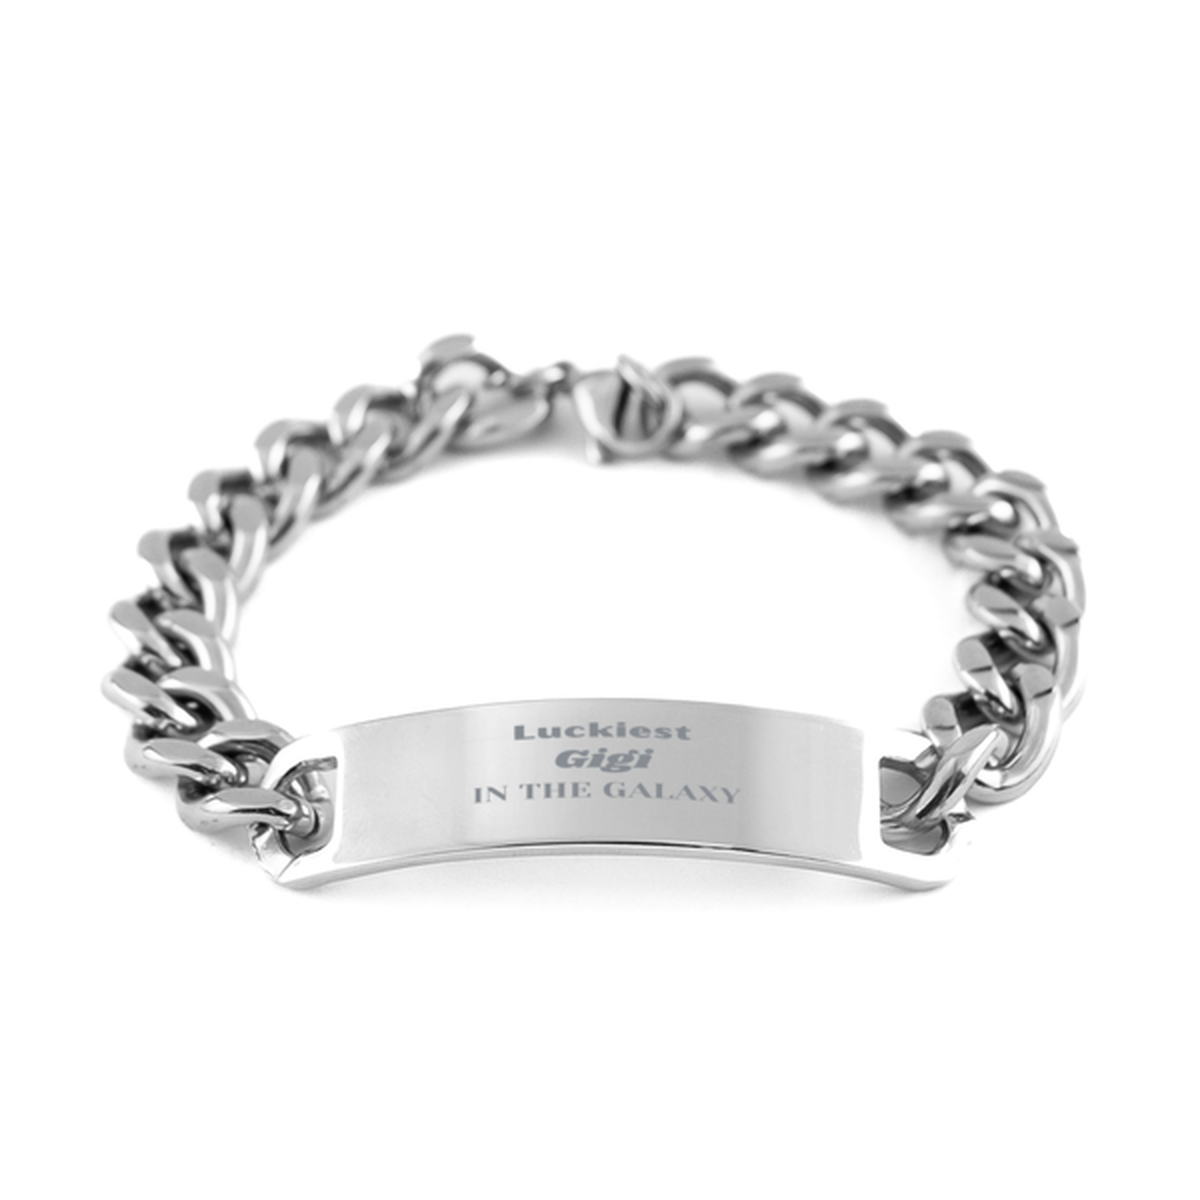 Luckiest Gigi in the Galaxy, To My Gigi Engraved Gifts, Christmas Gigi Cuban Chain Stainless Steel Bracelet Gifts, X-mas Birthday Unique Gifts For Gigi Men Women